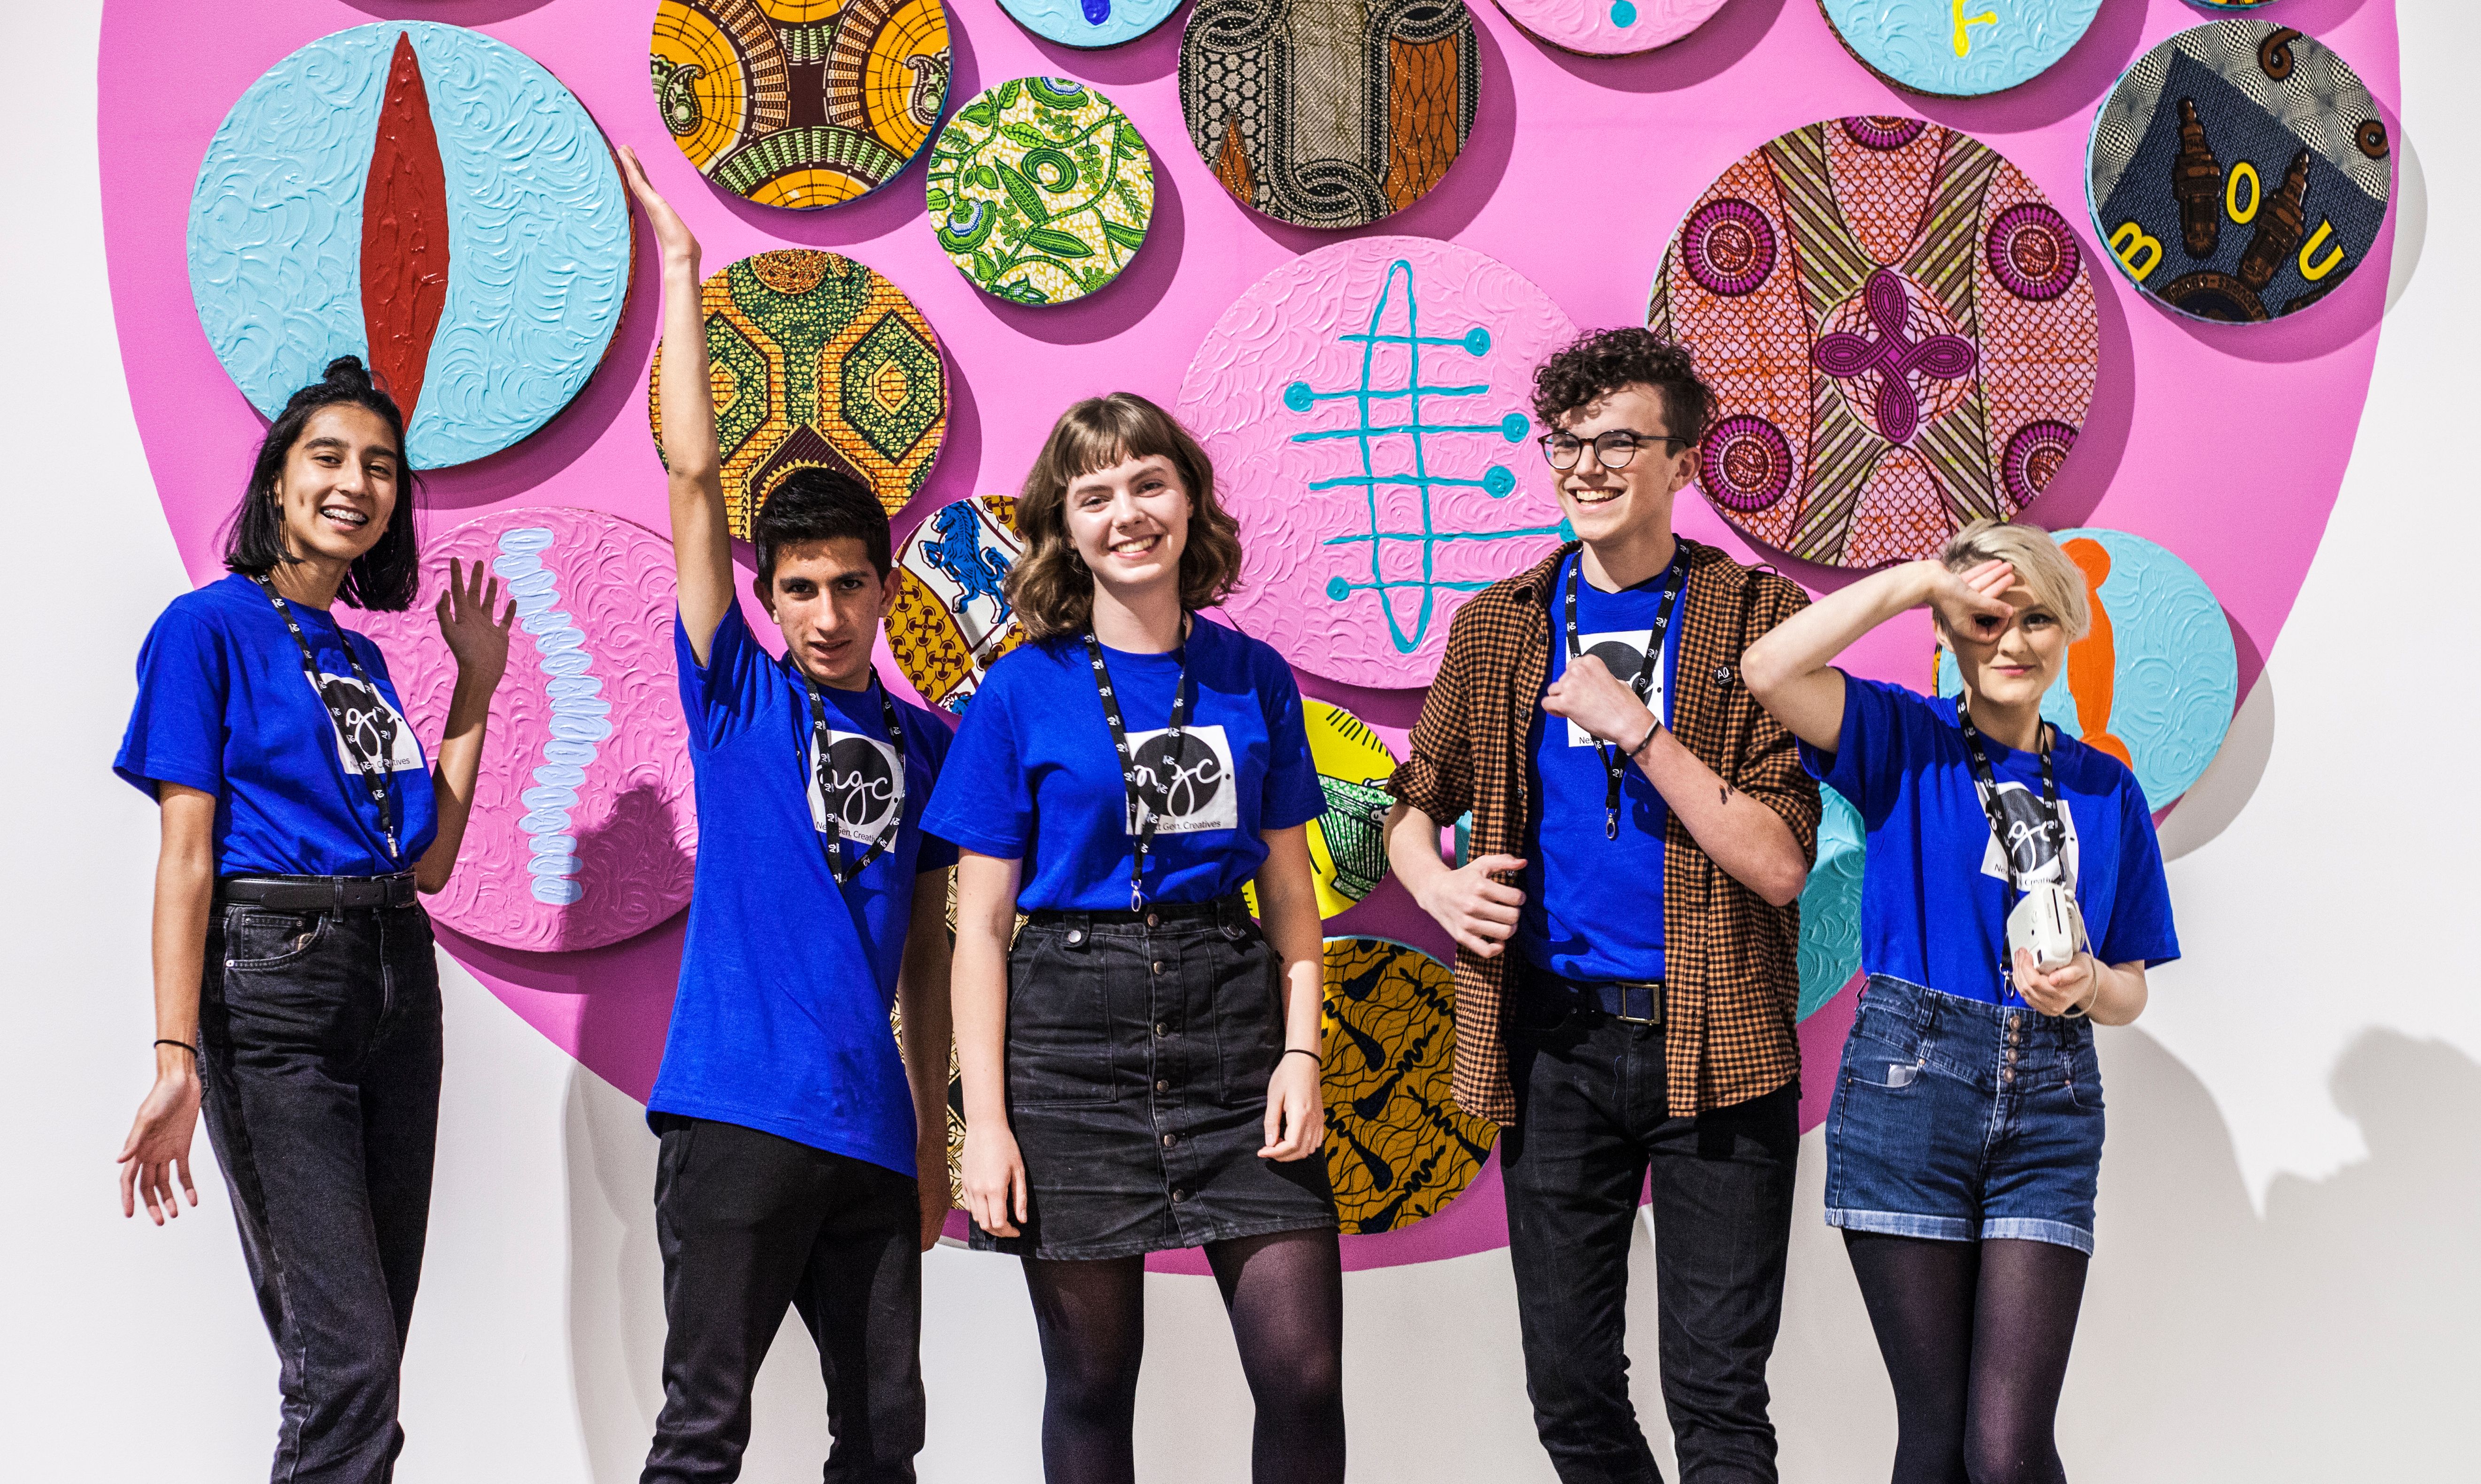 Five young people wearing electric blue tshirts infront of a bright pink background looking happy